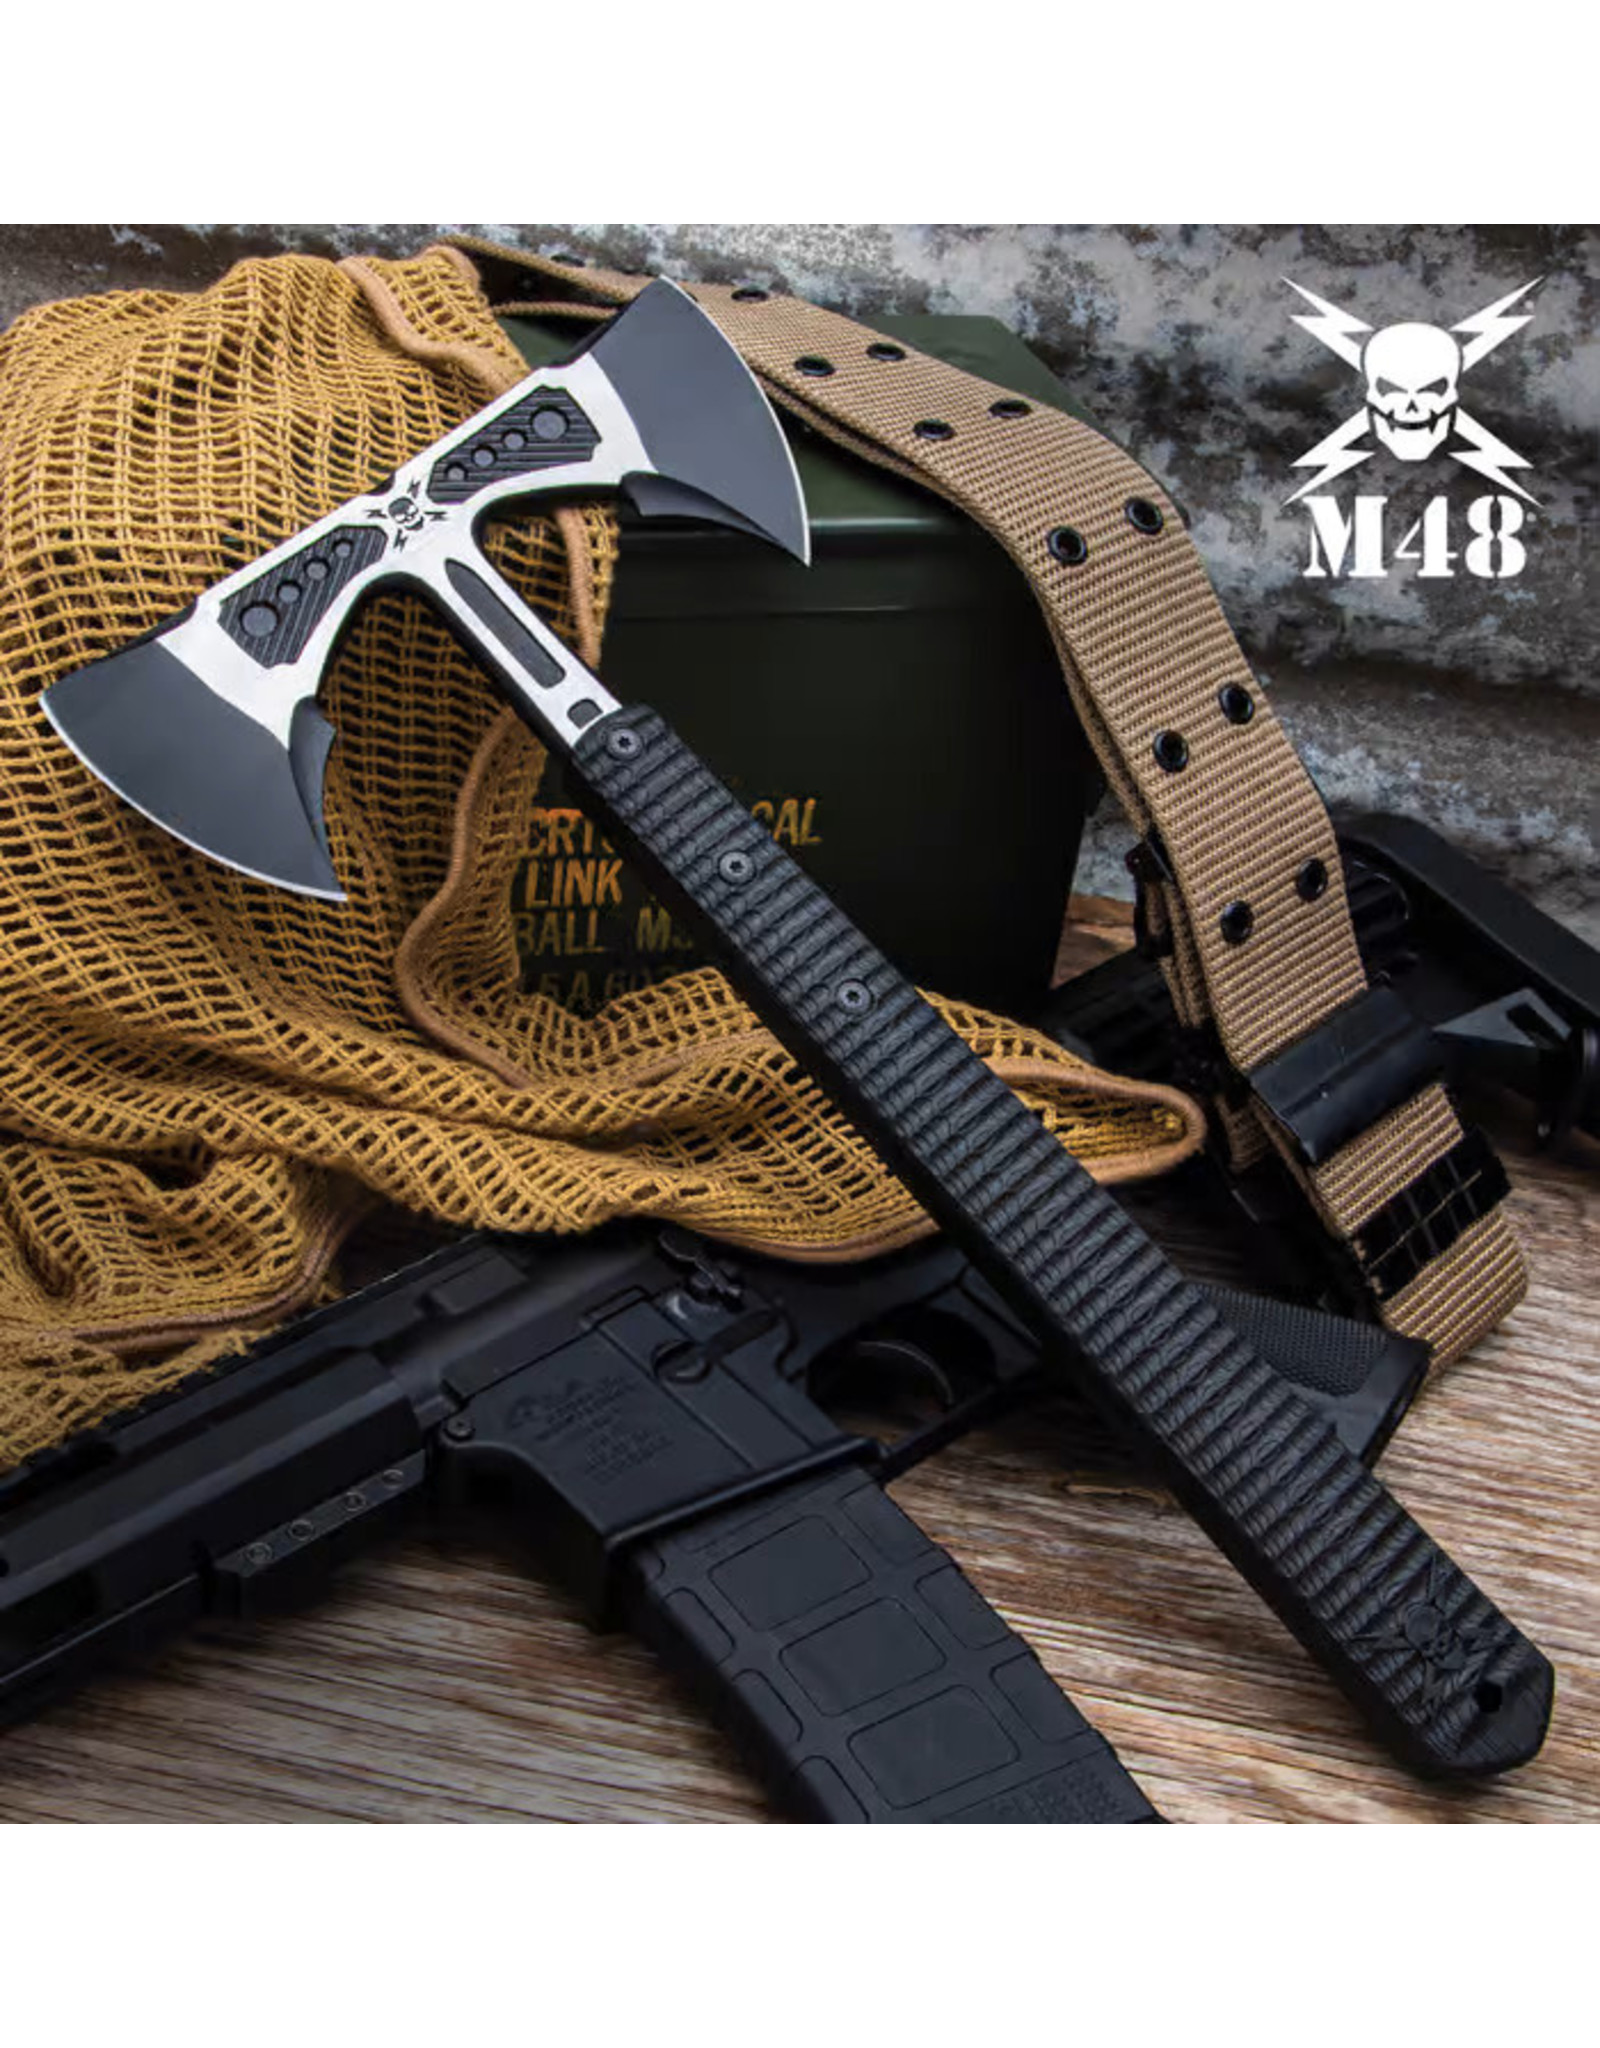 United Cutlery M48 Liberator Double-Headed Infantry Tomahawk Axe And Sheath - 2Cr13 Cast Stainless Steel, Injection Molded Nylon Handle - Length 15 3/4”